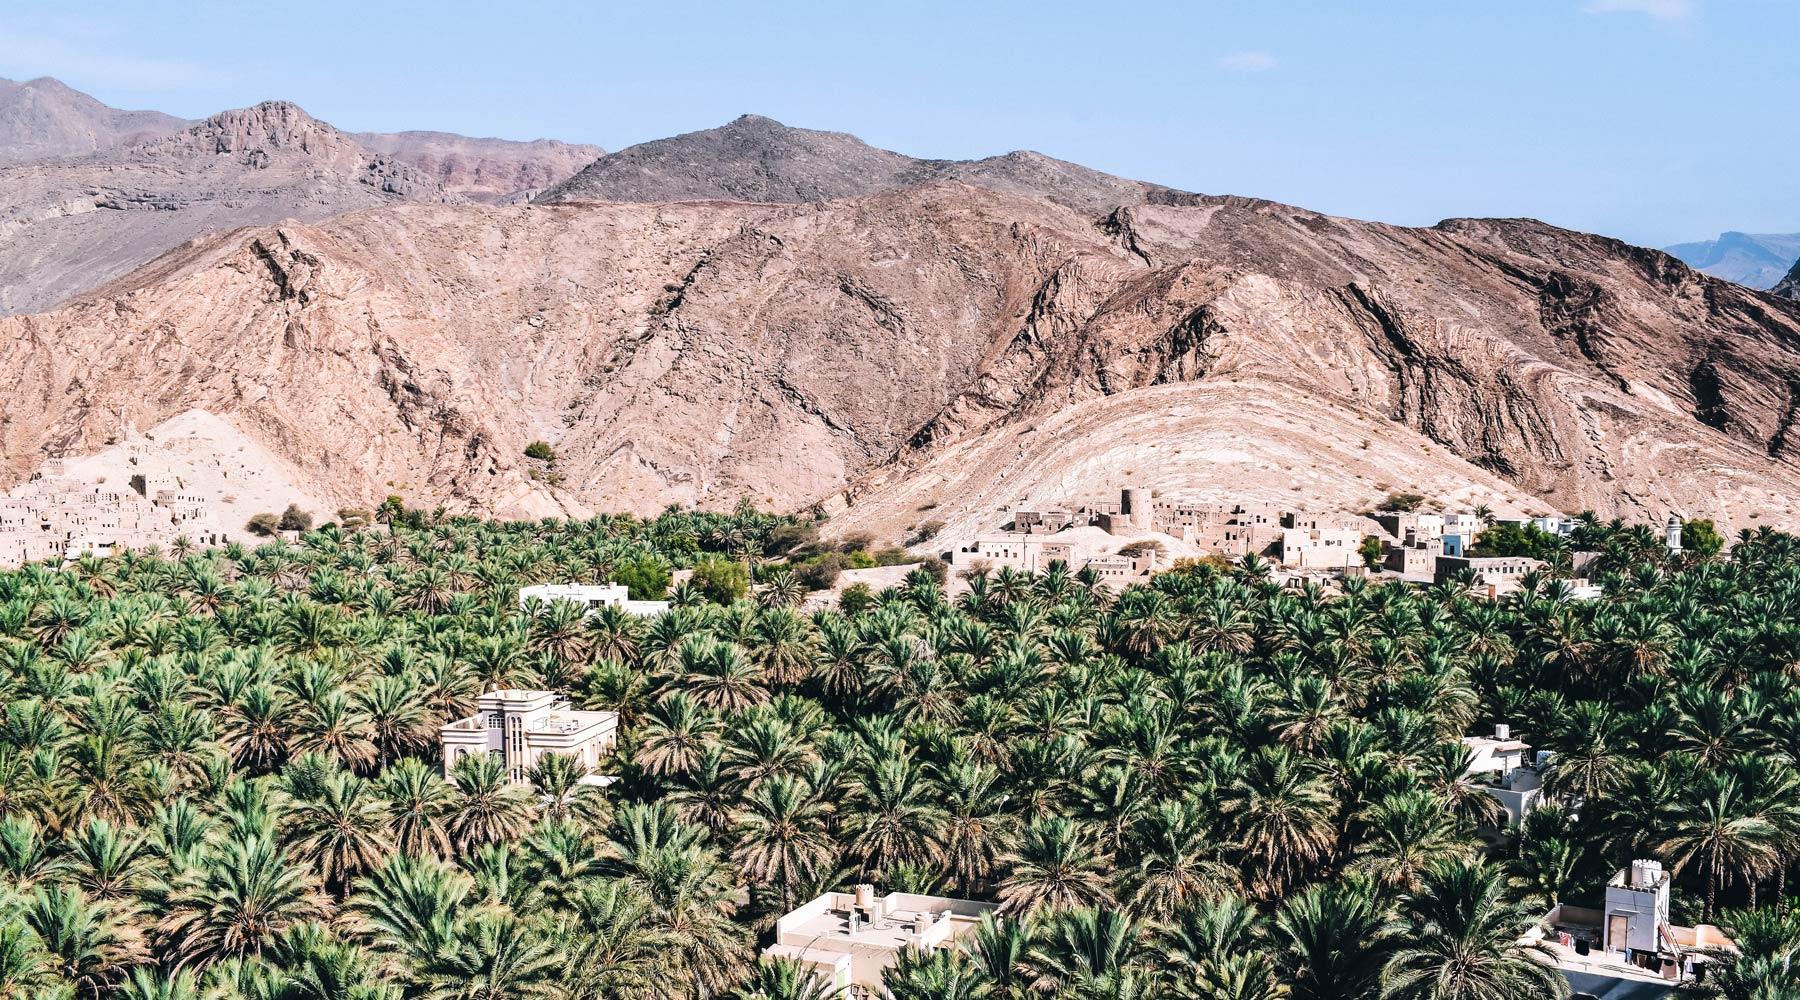 Why Visit The Al Hajar Mountains?